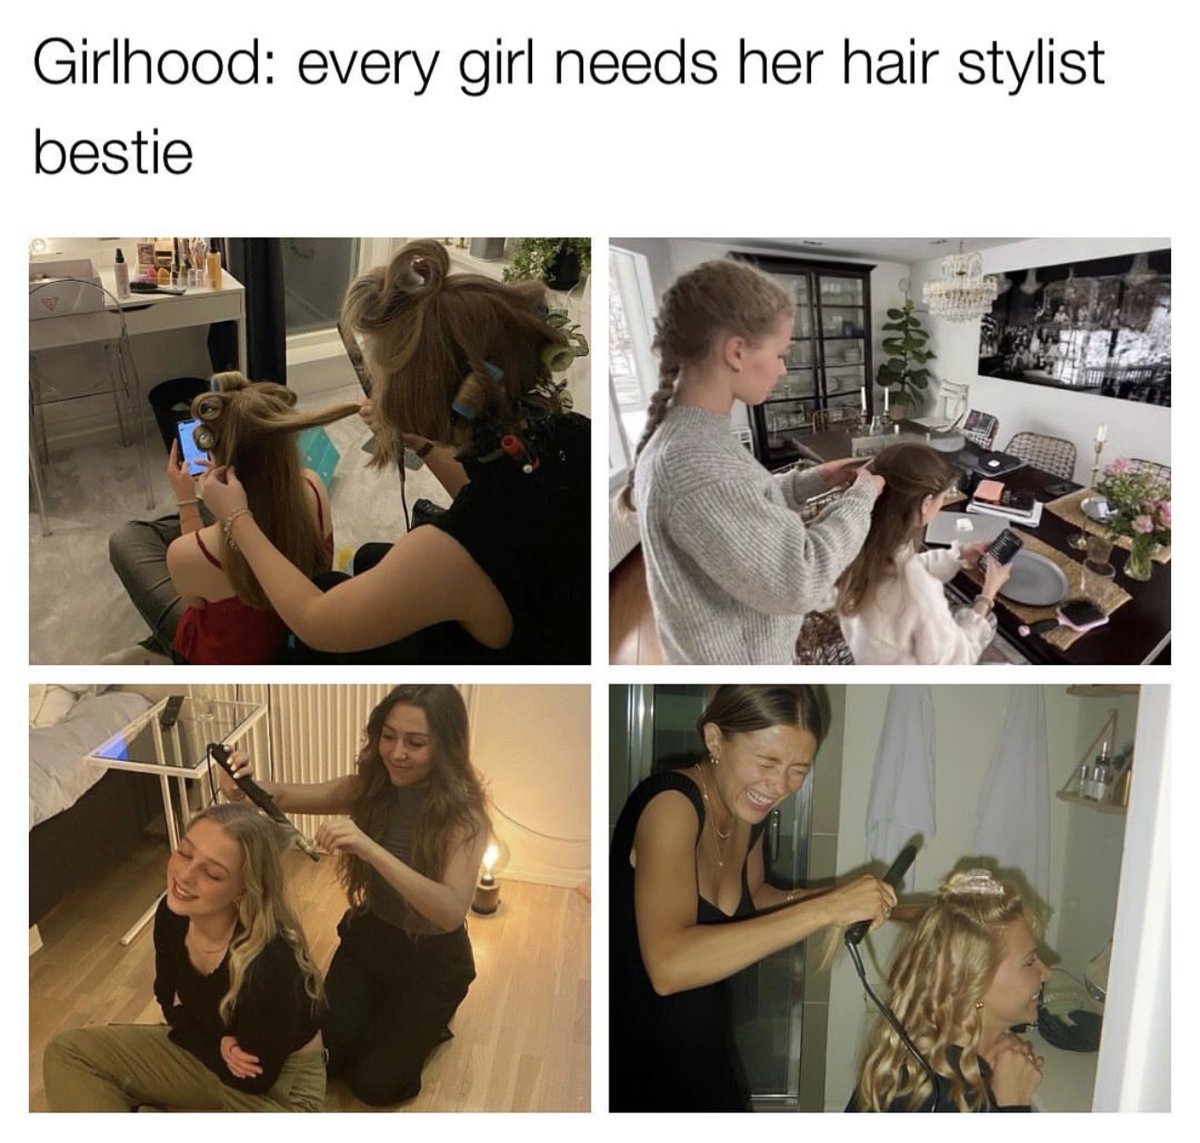 Tag the bestie who's the designated hairstylist of the group🤭